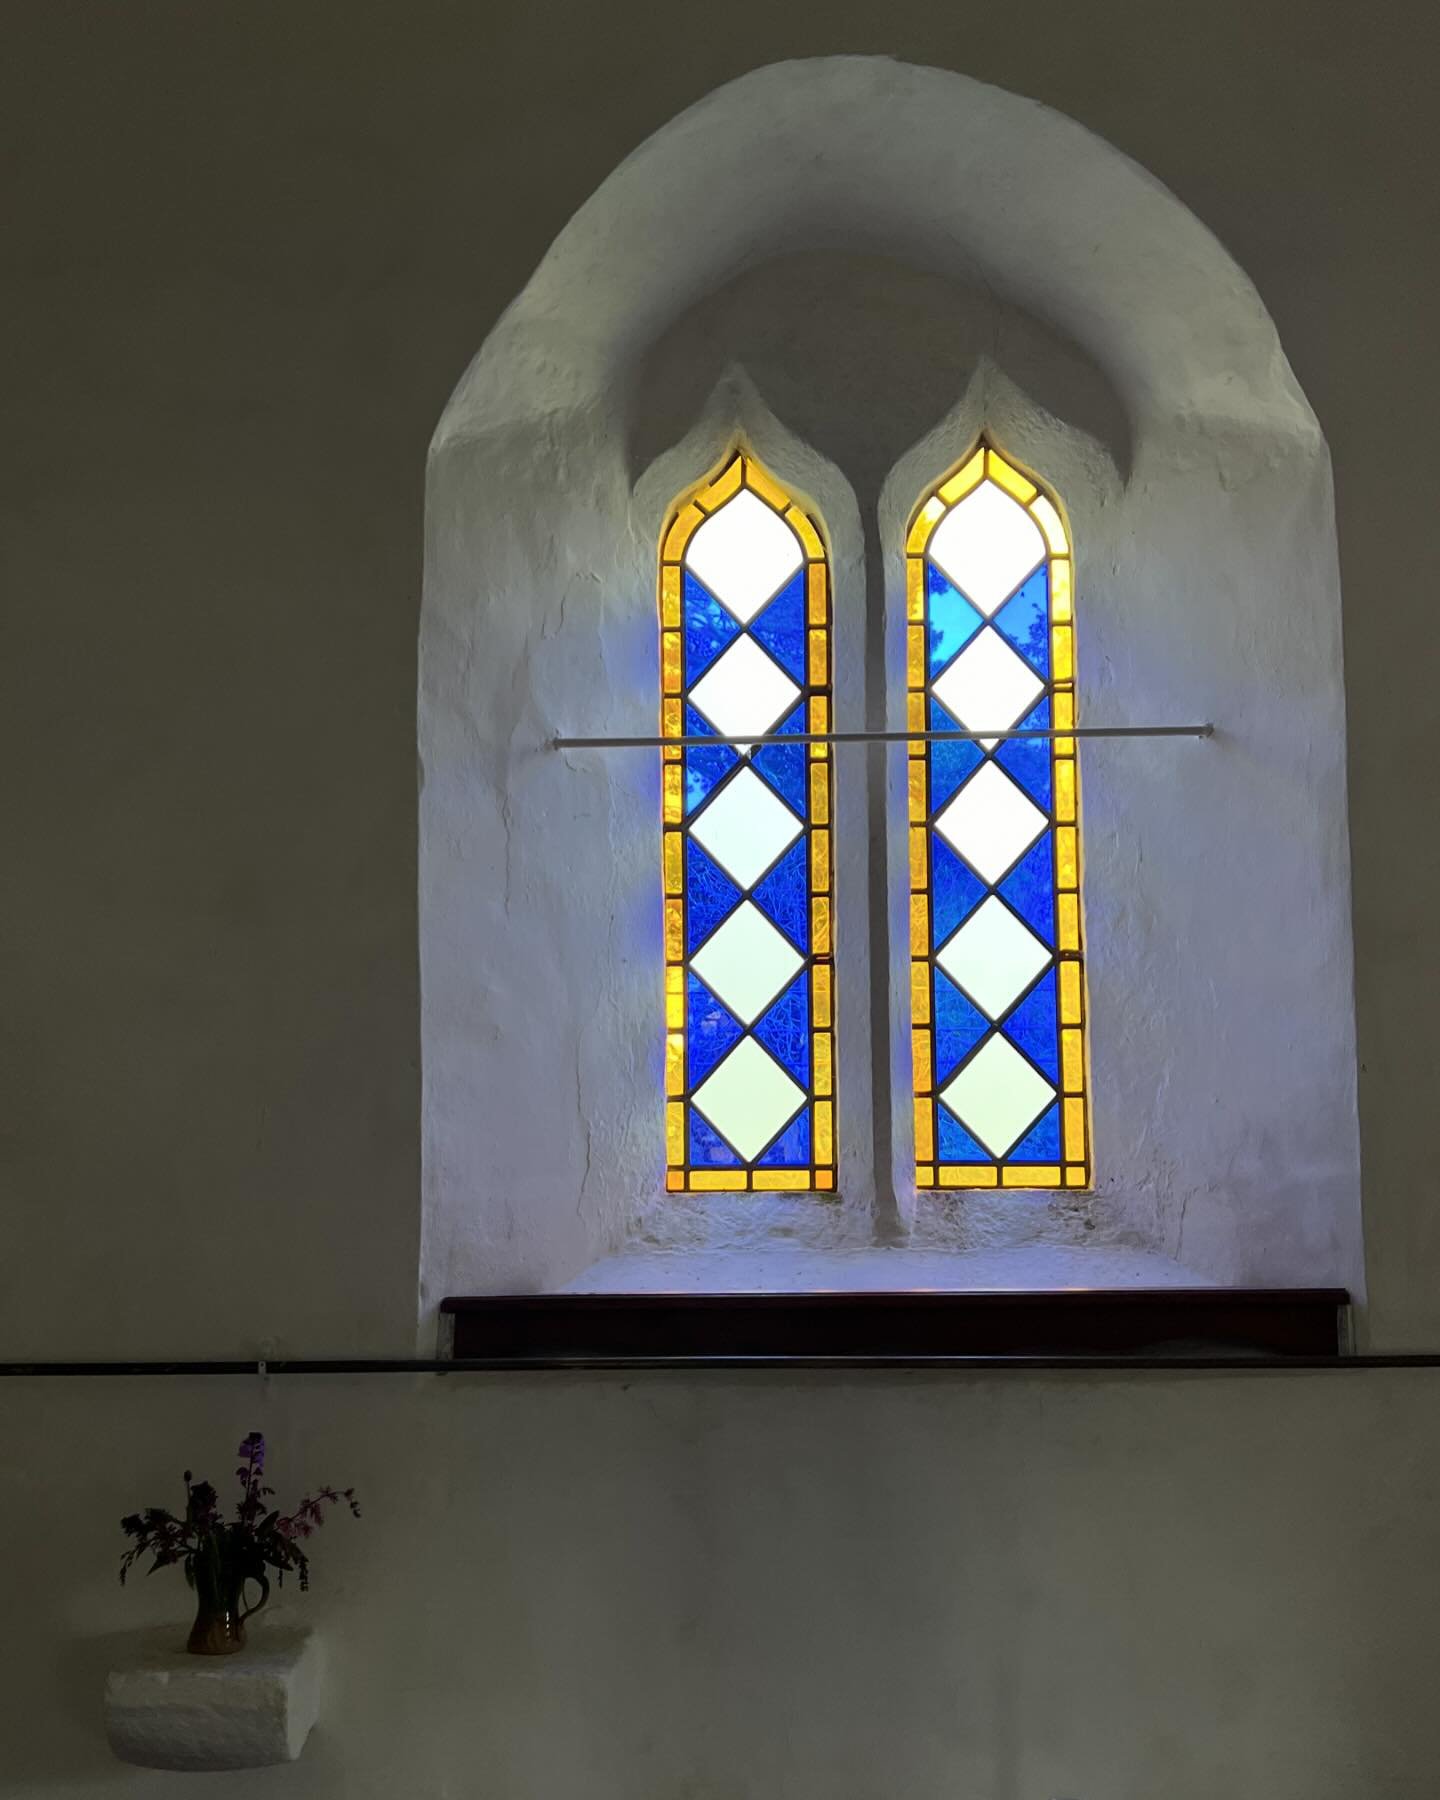 When I made stained glass panels and windows I loved layering, complex intriguing patterns and playing with and on abstract/ figurative images. However, one of my favorite windows remains this - a simple geometric window in my local church at Aylton.